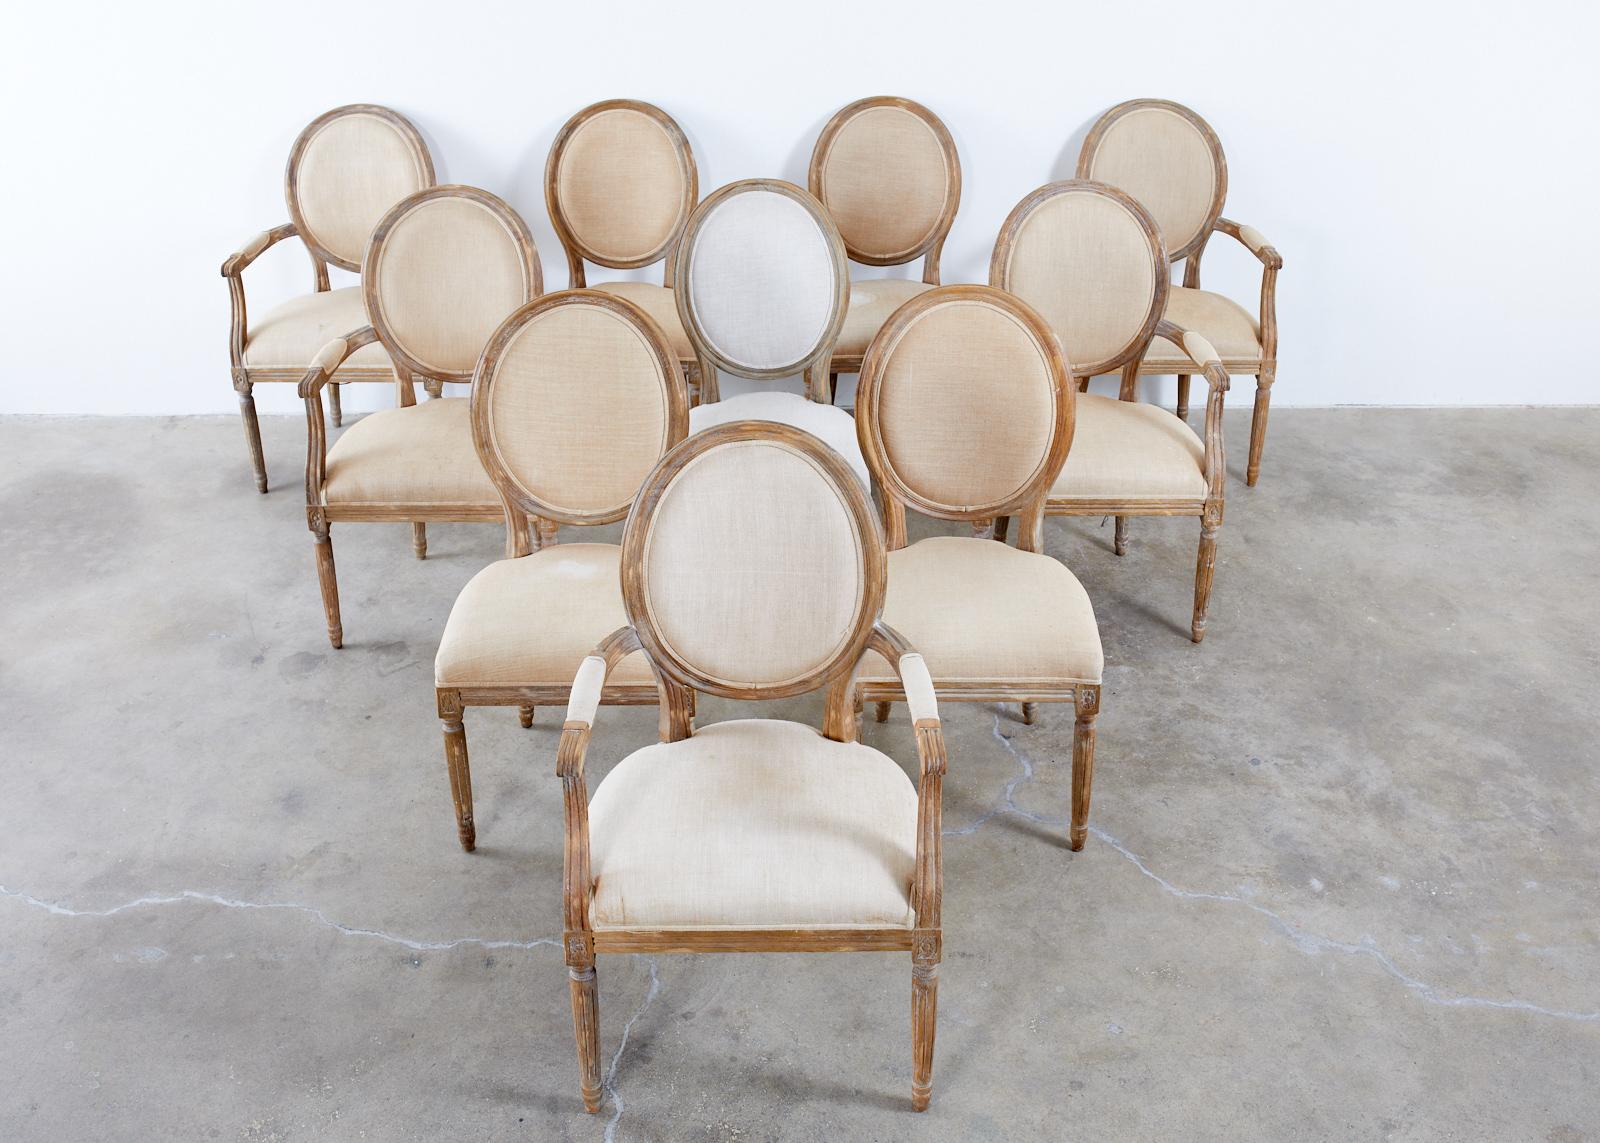 Large set of ten weathered oak dining chairs made in the neoclassical French Louis XVI taste. The set consists of five generous armchairs and five matching side chairs measuring 20 inches wide. The chairs feature a Belgian linen upholstery with an